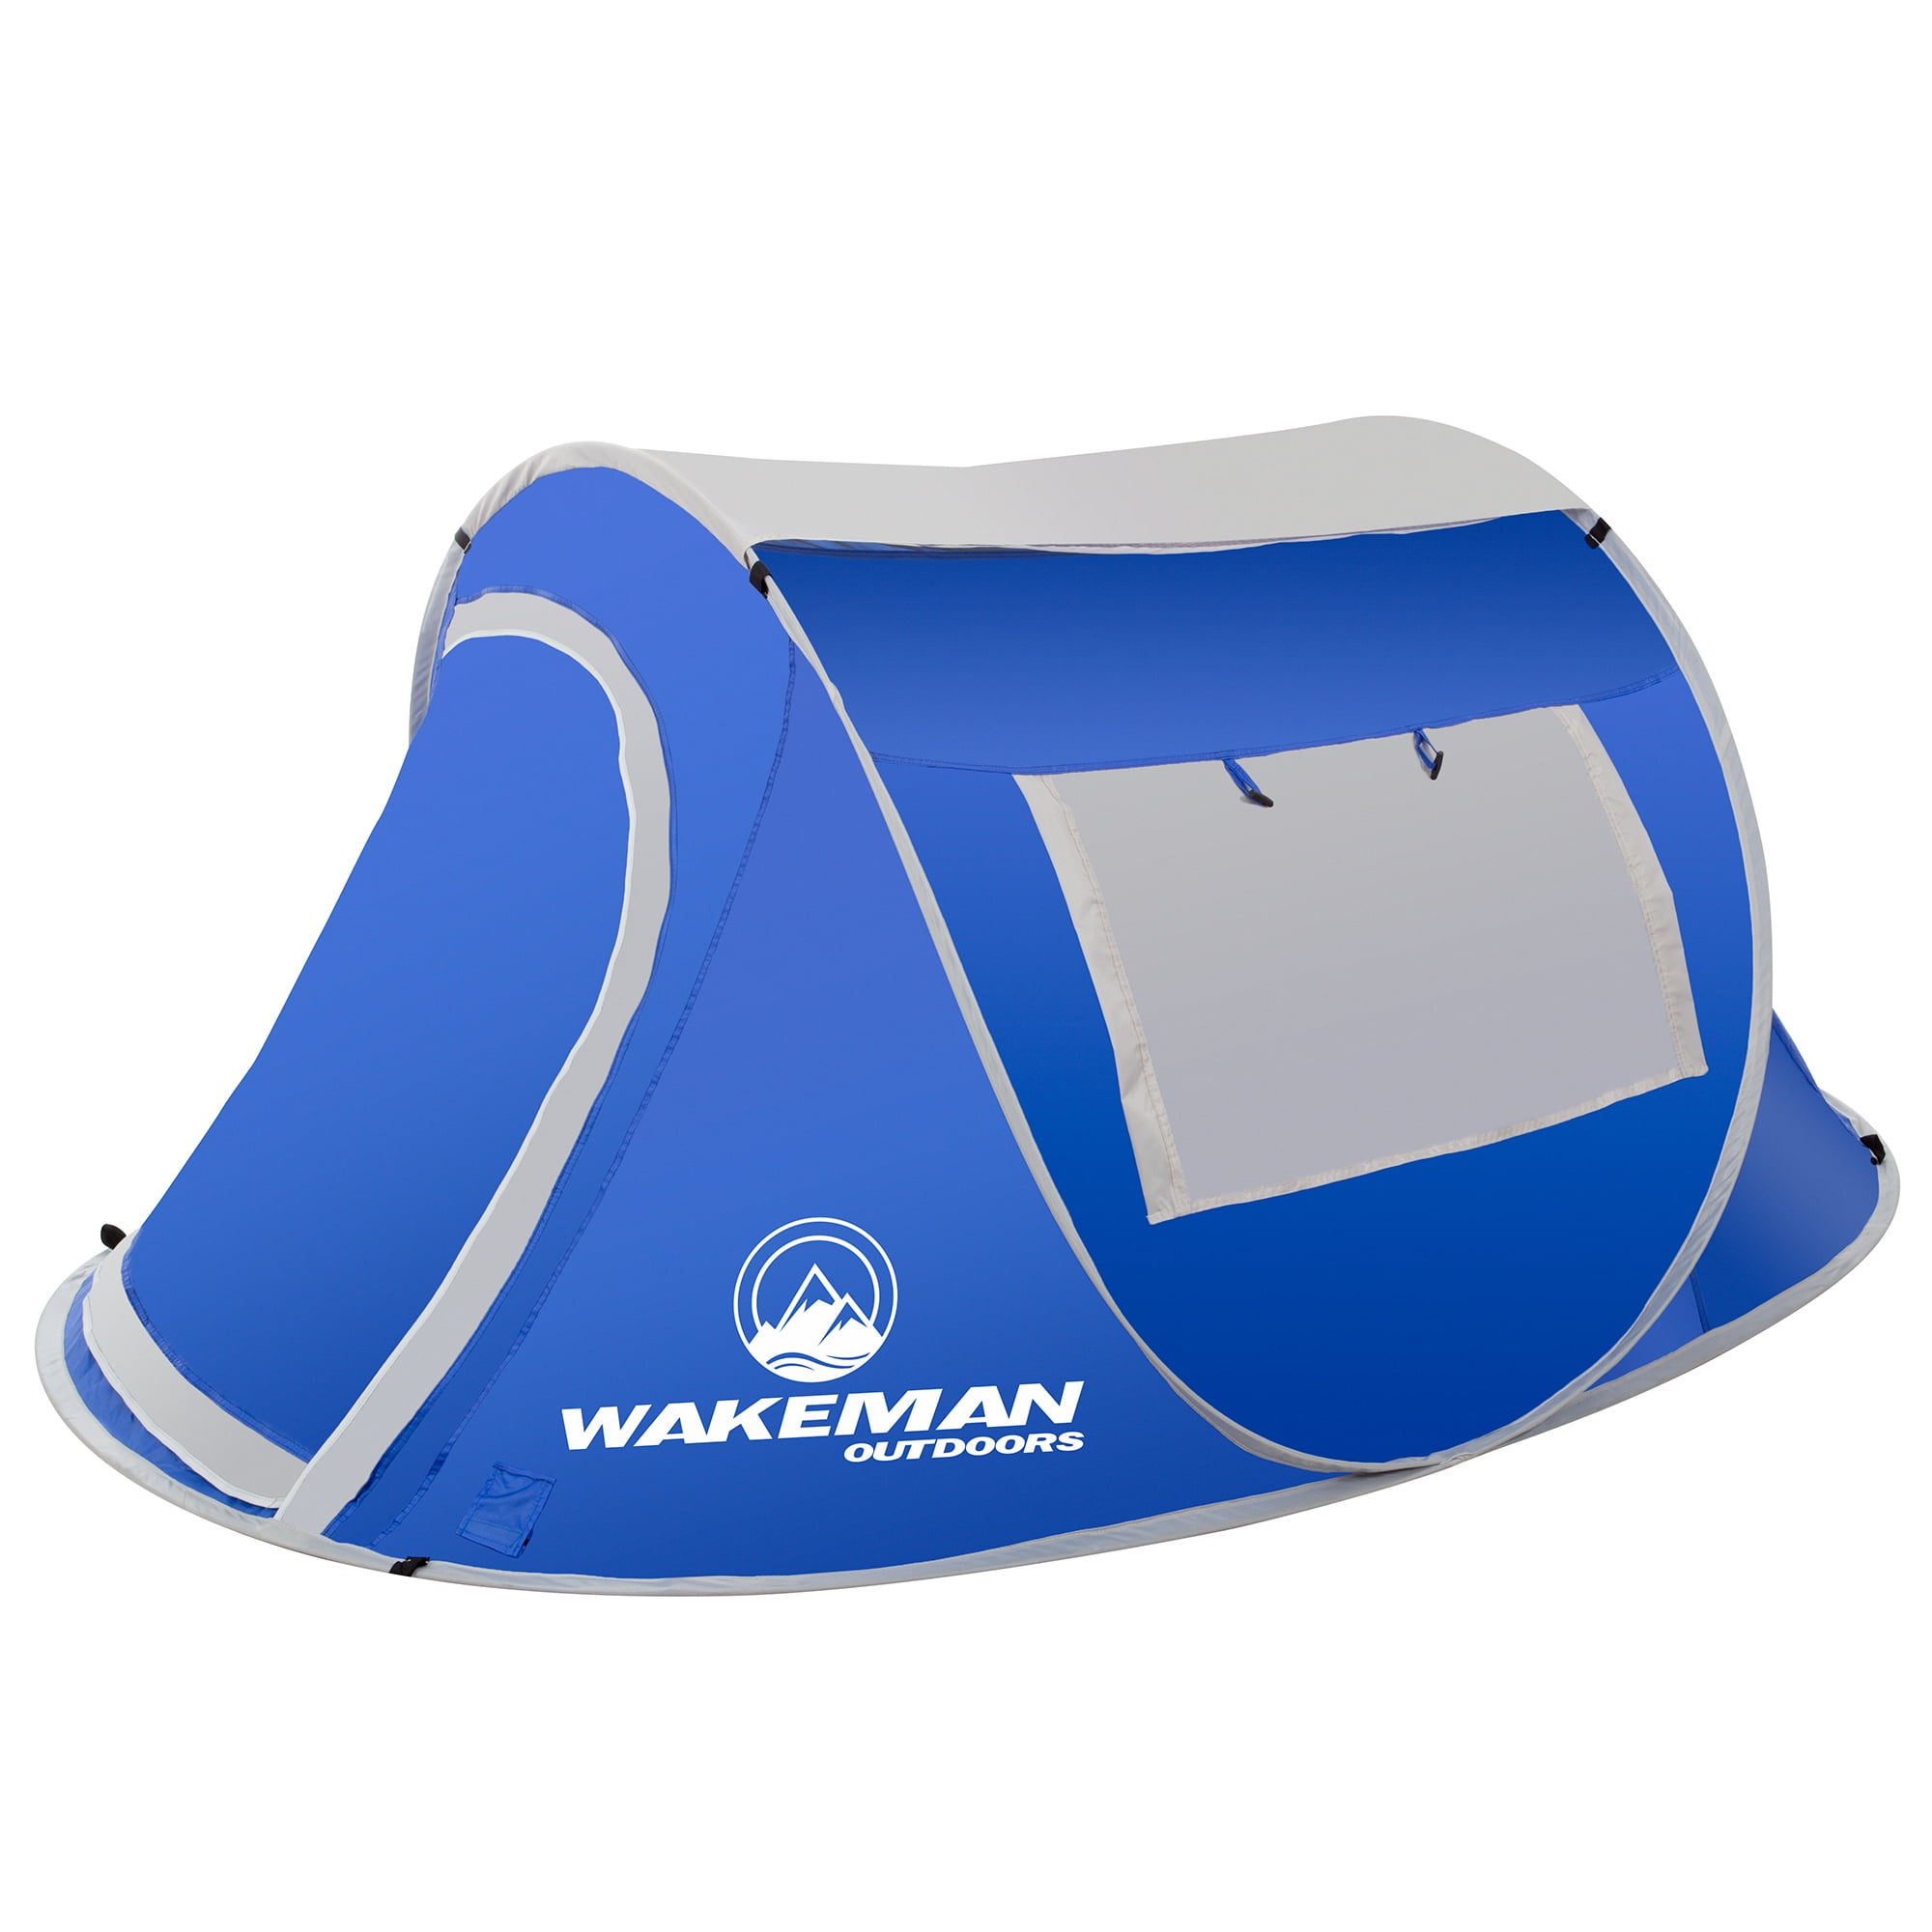 2-Person Pop-up Tent - Water-Resistant Polyester Tent for Camping and  Backpacking with Rainfly, Tent Stakes, and Carry Bag - Blue, by Wakeman  Outdoors